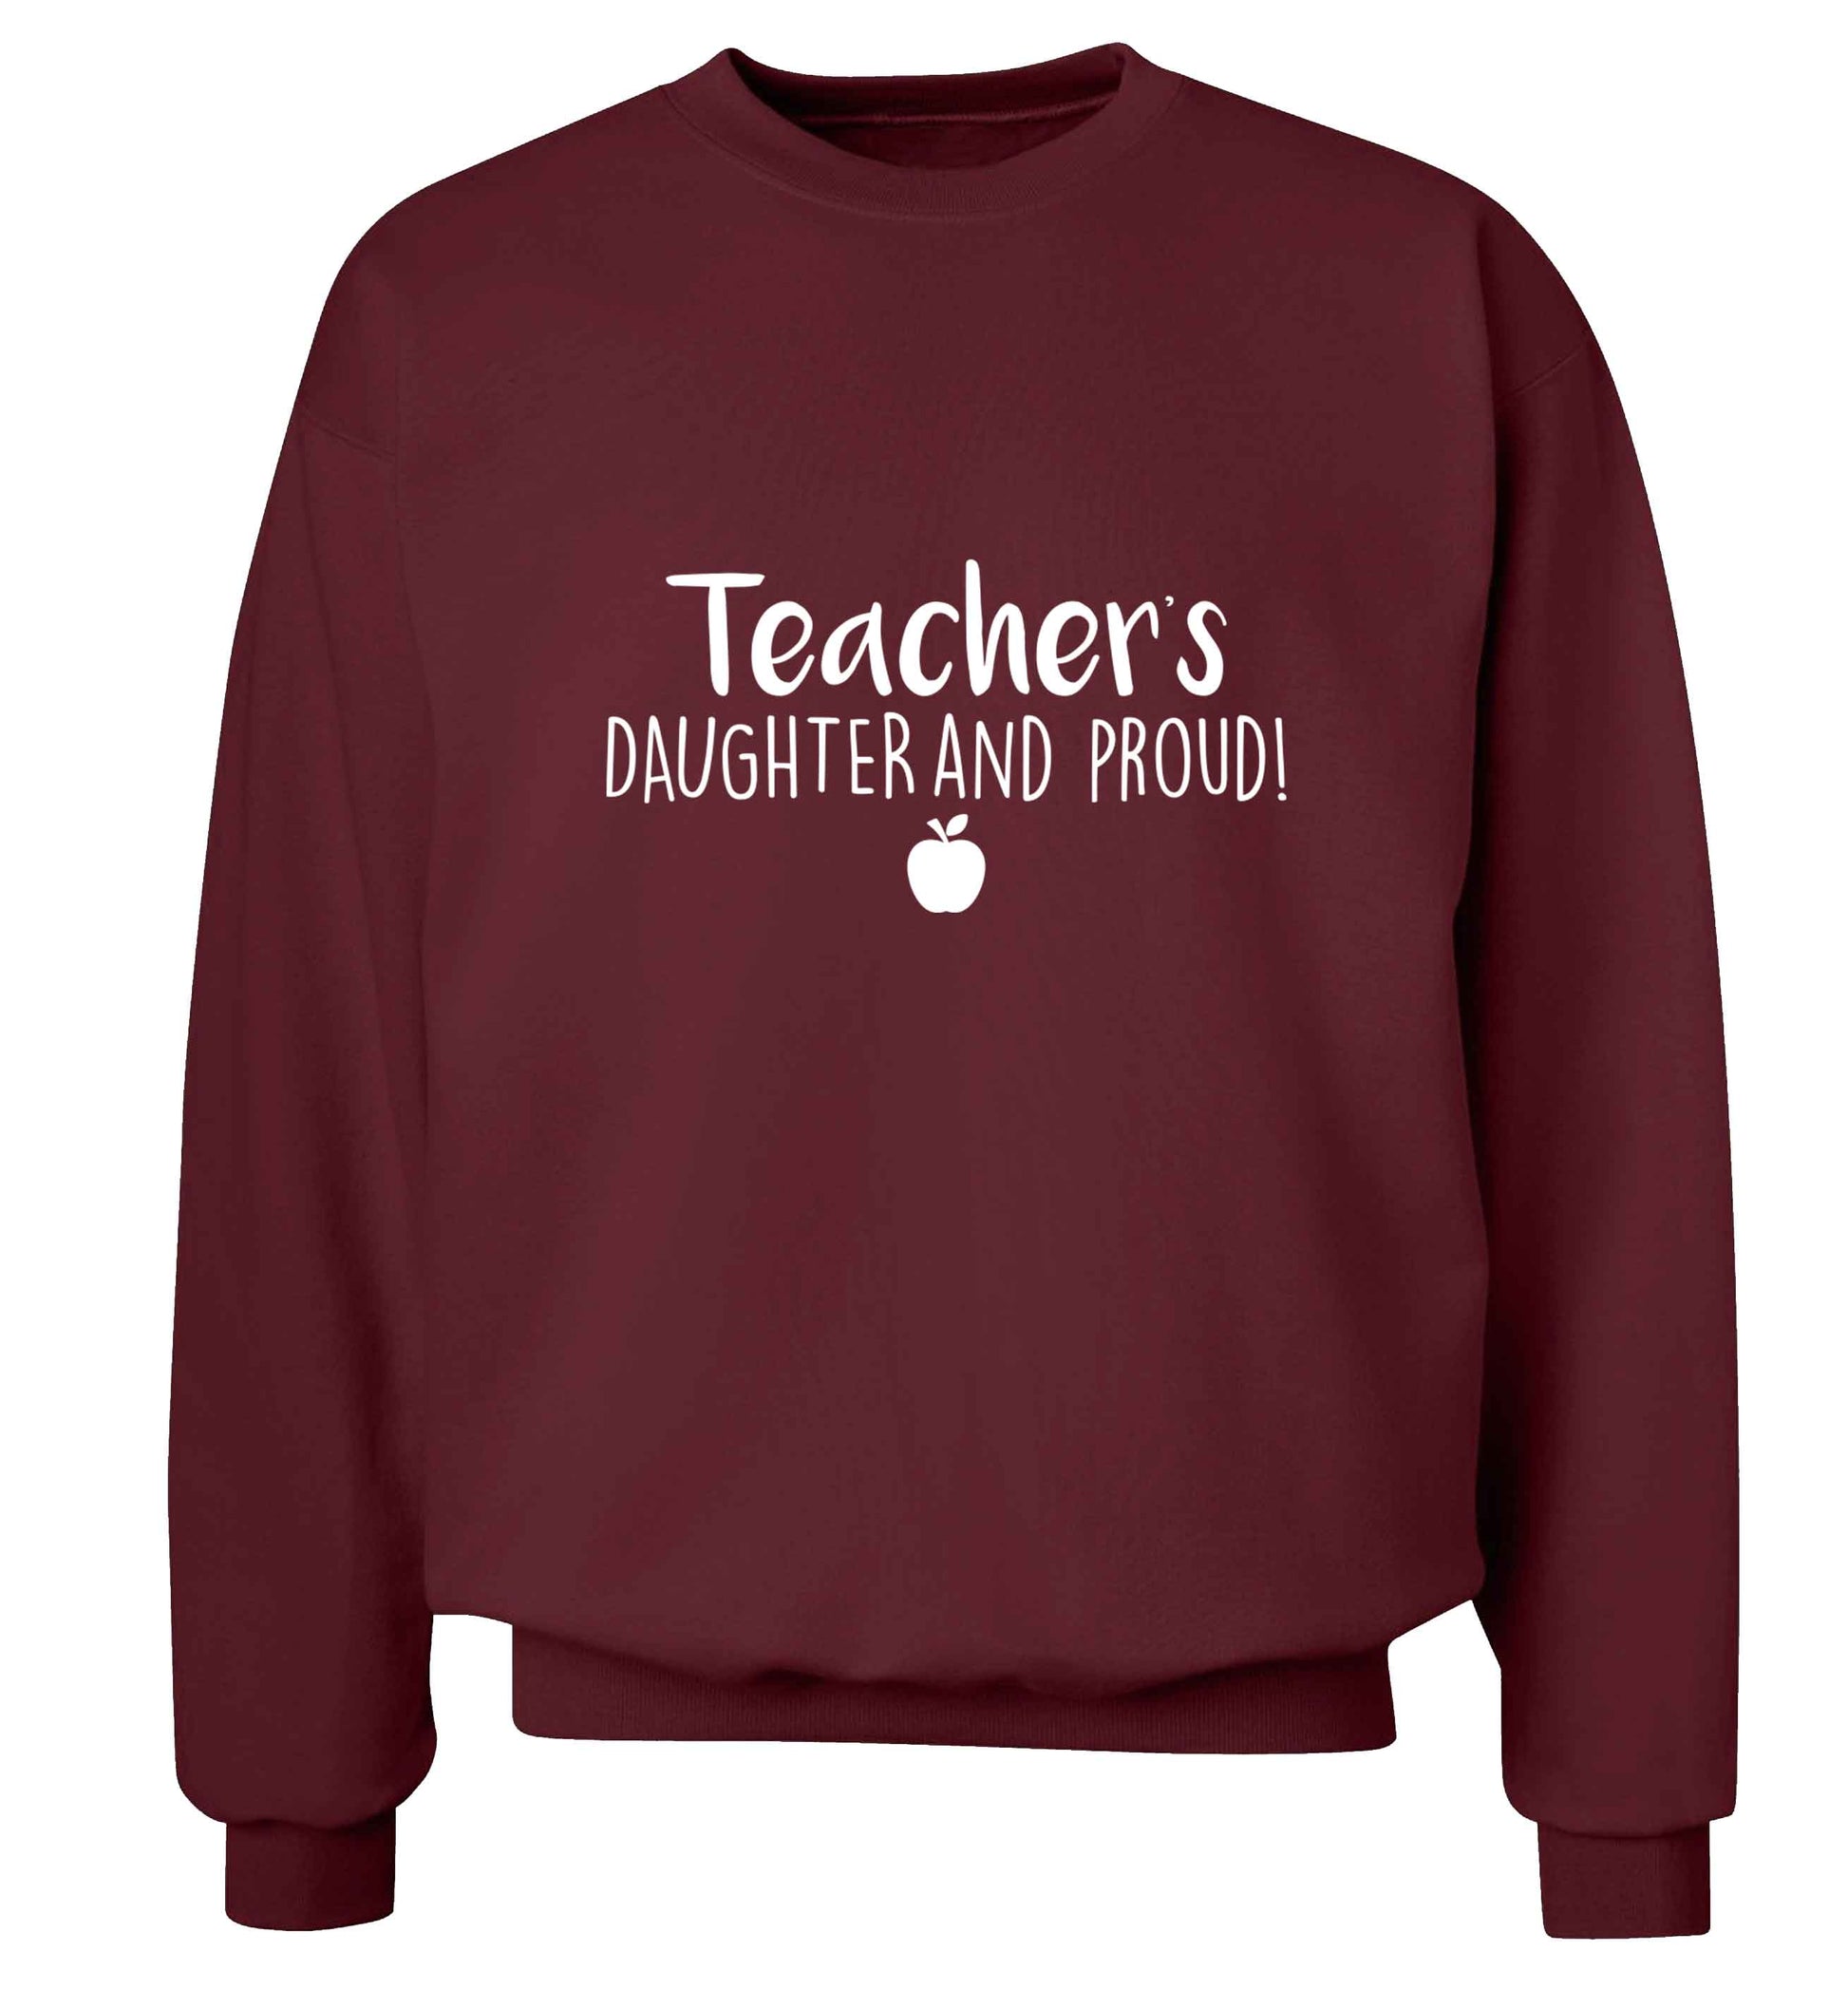 Teachers daughter and proud adult's unisex maroon sweater 2XL